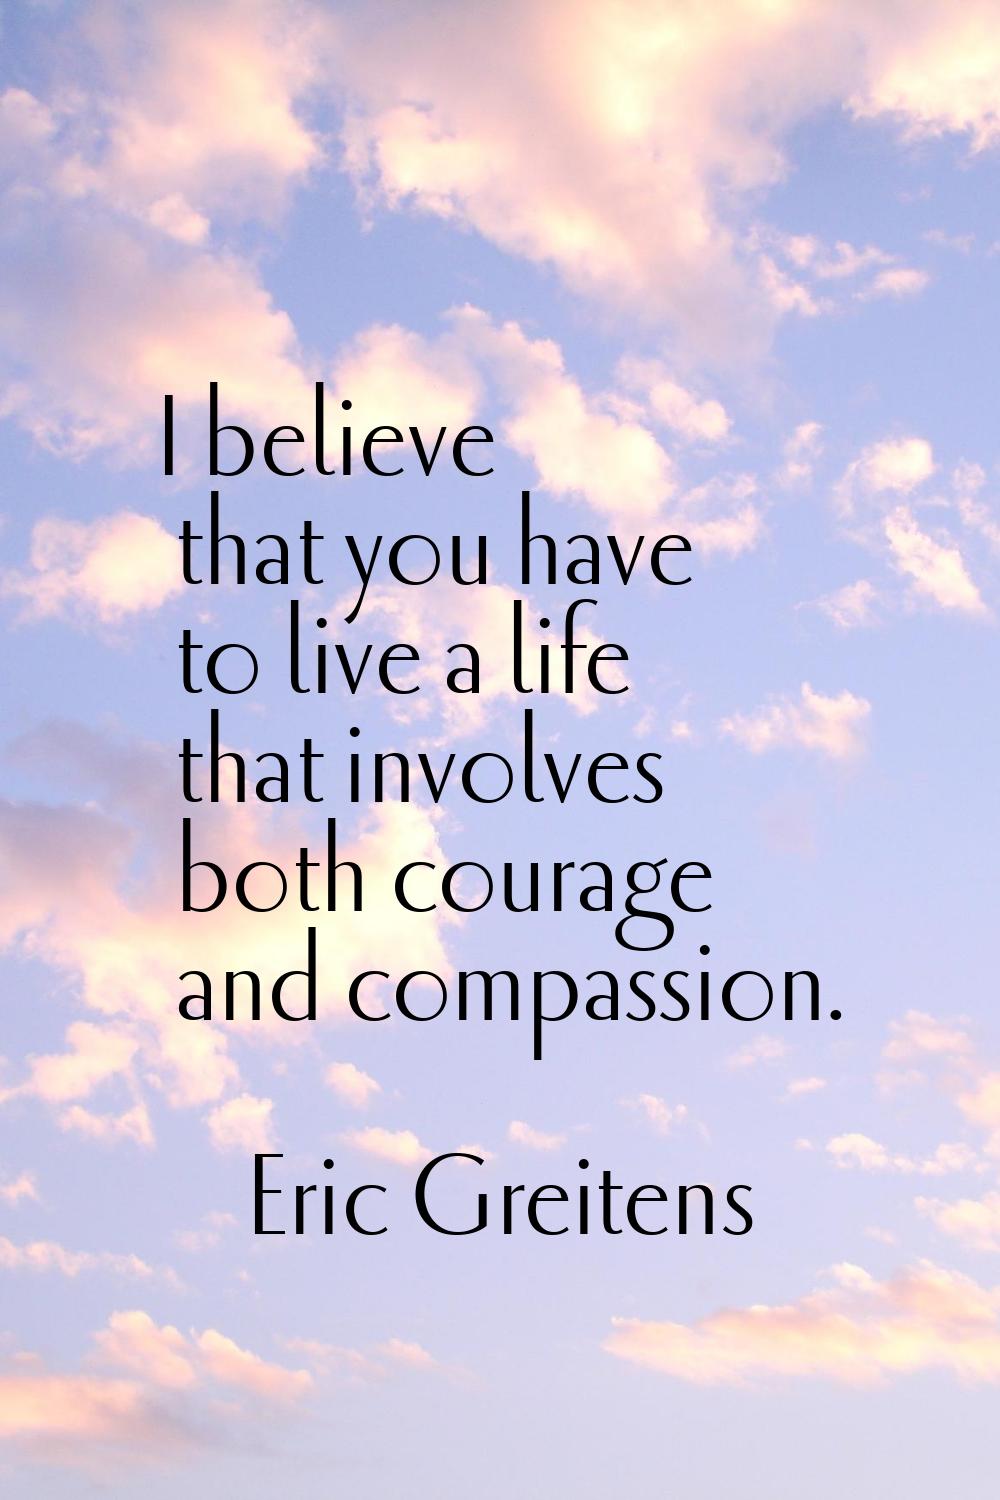 I believe that you have to live a life that involves both courage and compassion.